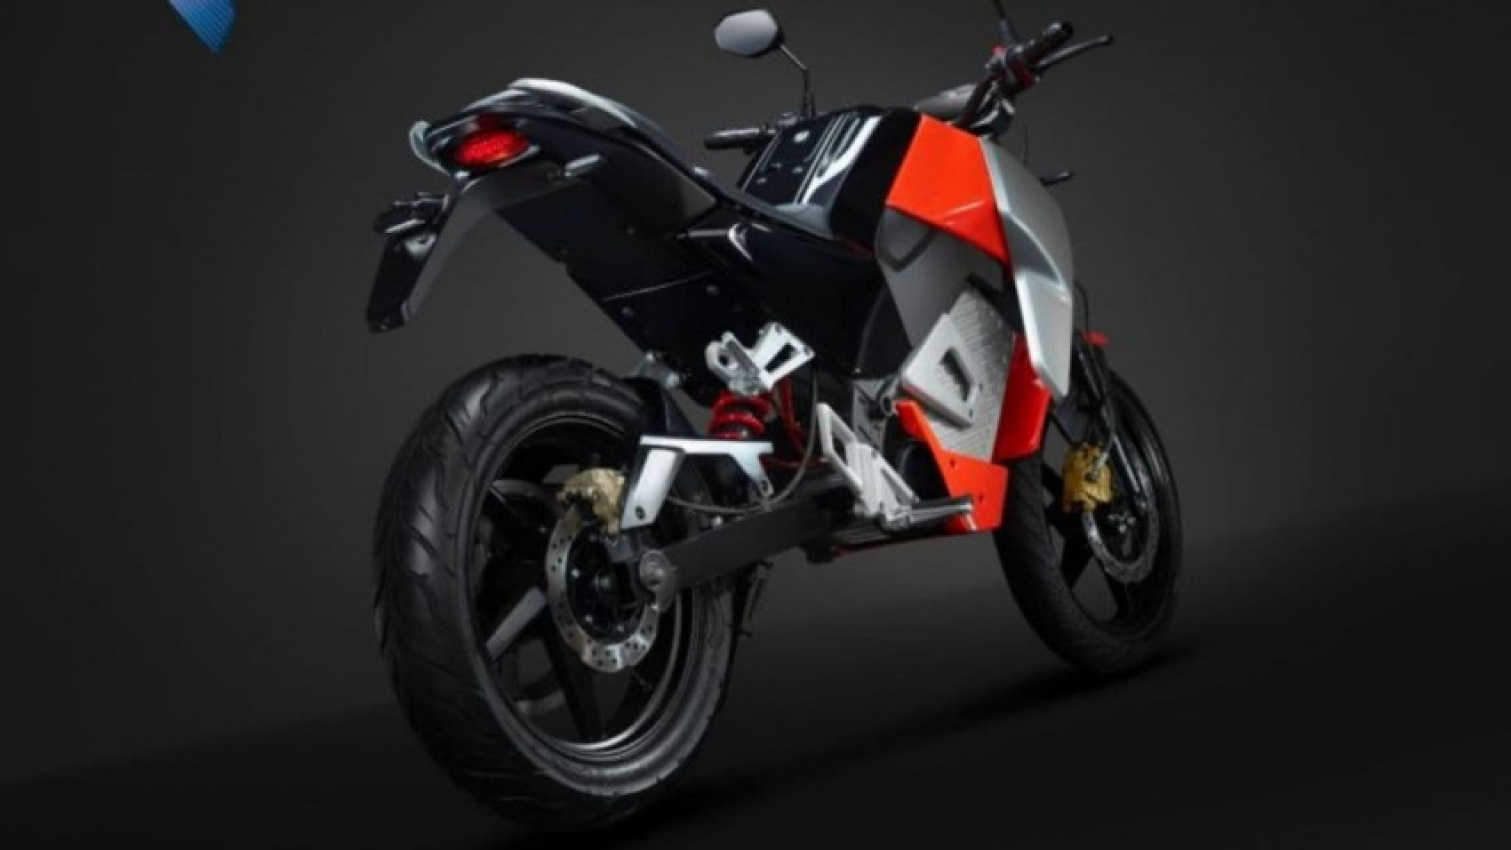 autos, cars, auto news, bike-model-rorr, carandbike, news, oben electric, oben rorr, oben rorr electric bike, oben rorr electric bike debut, oben rorr electric bike india, oben rorr electric bike india launch, oben rorr electric bike launch, oben rorr price, oben rorr specifications, oben rorr electric motorcycle launched in india, priced at 99,999